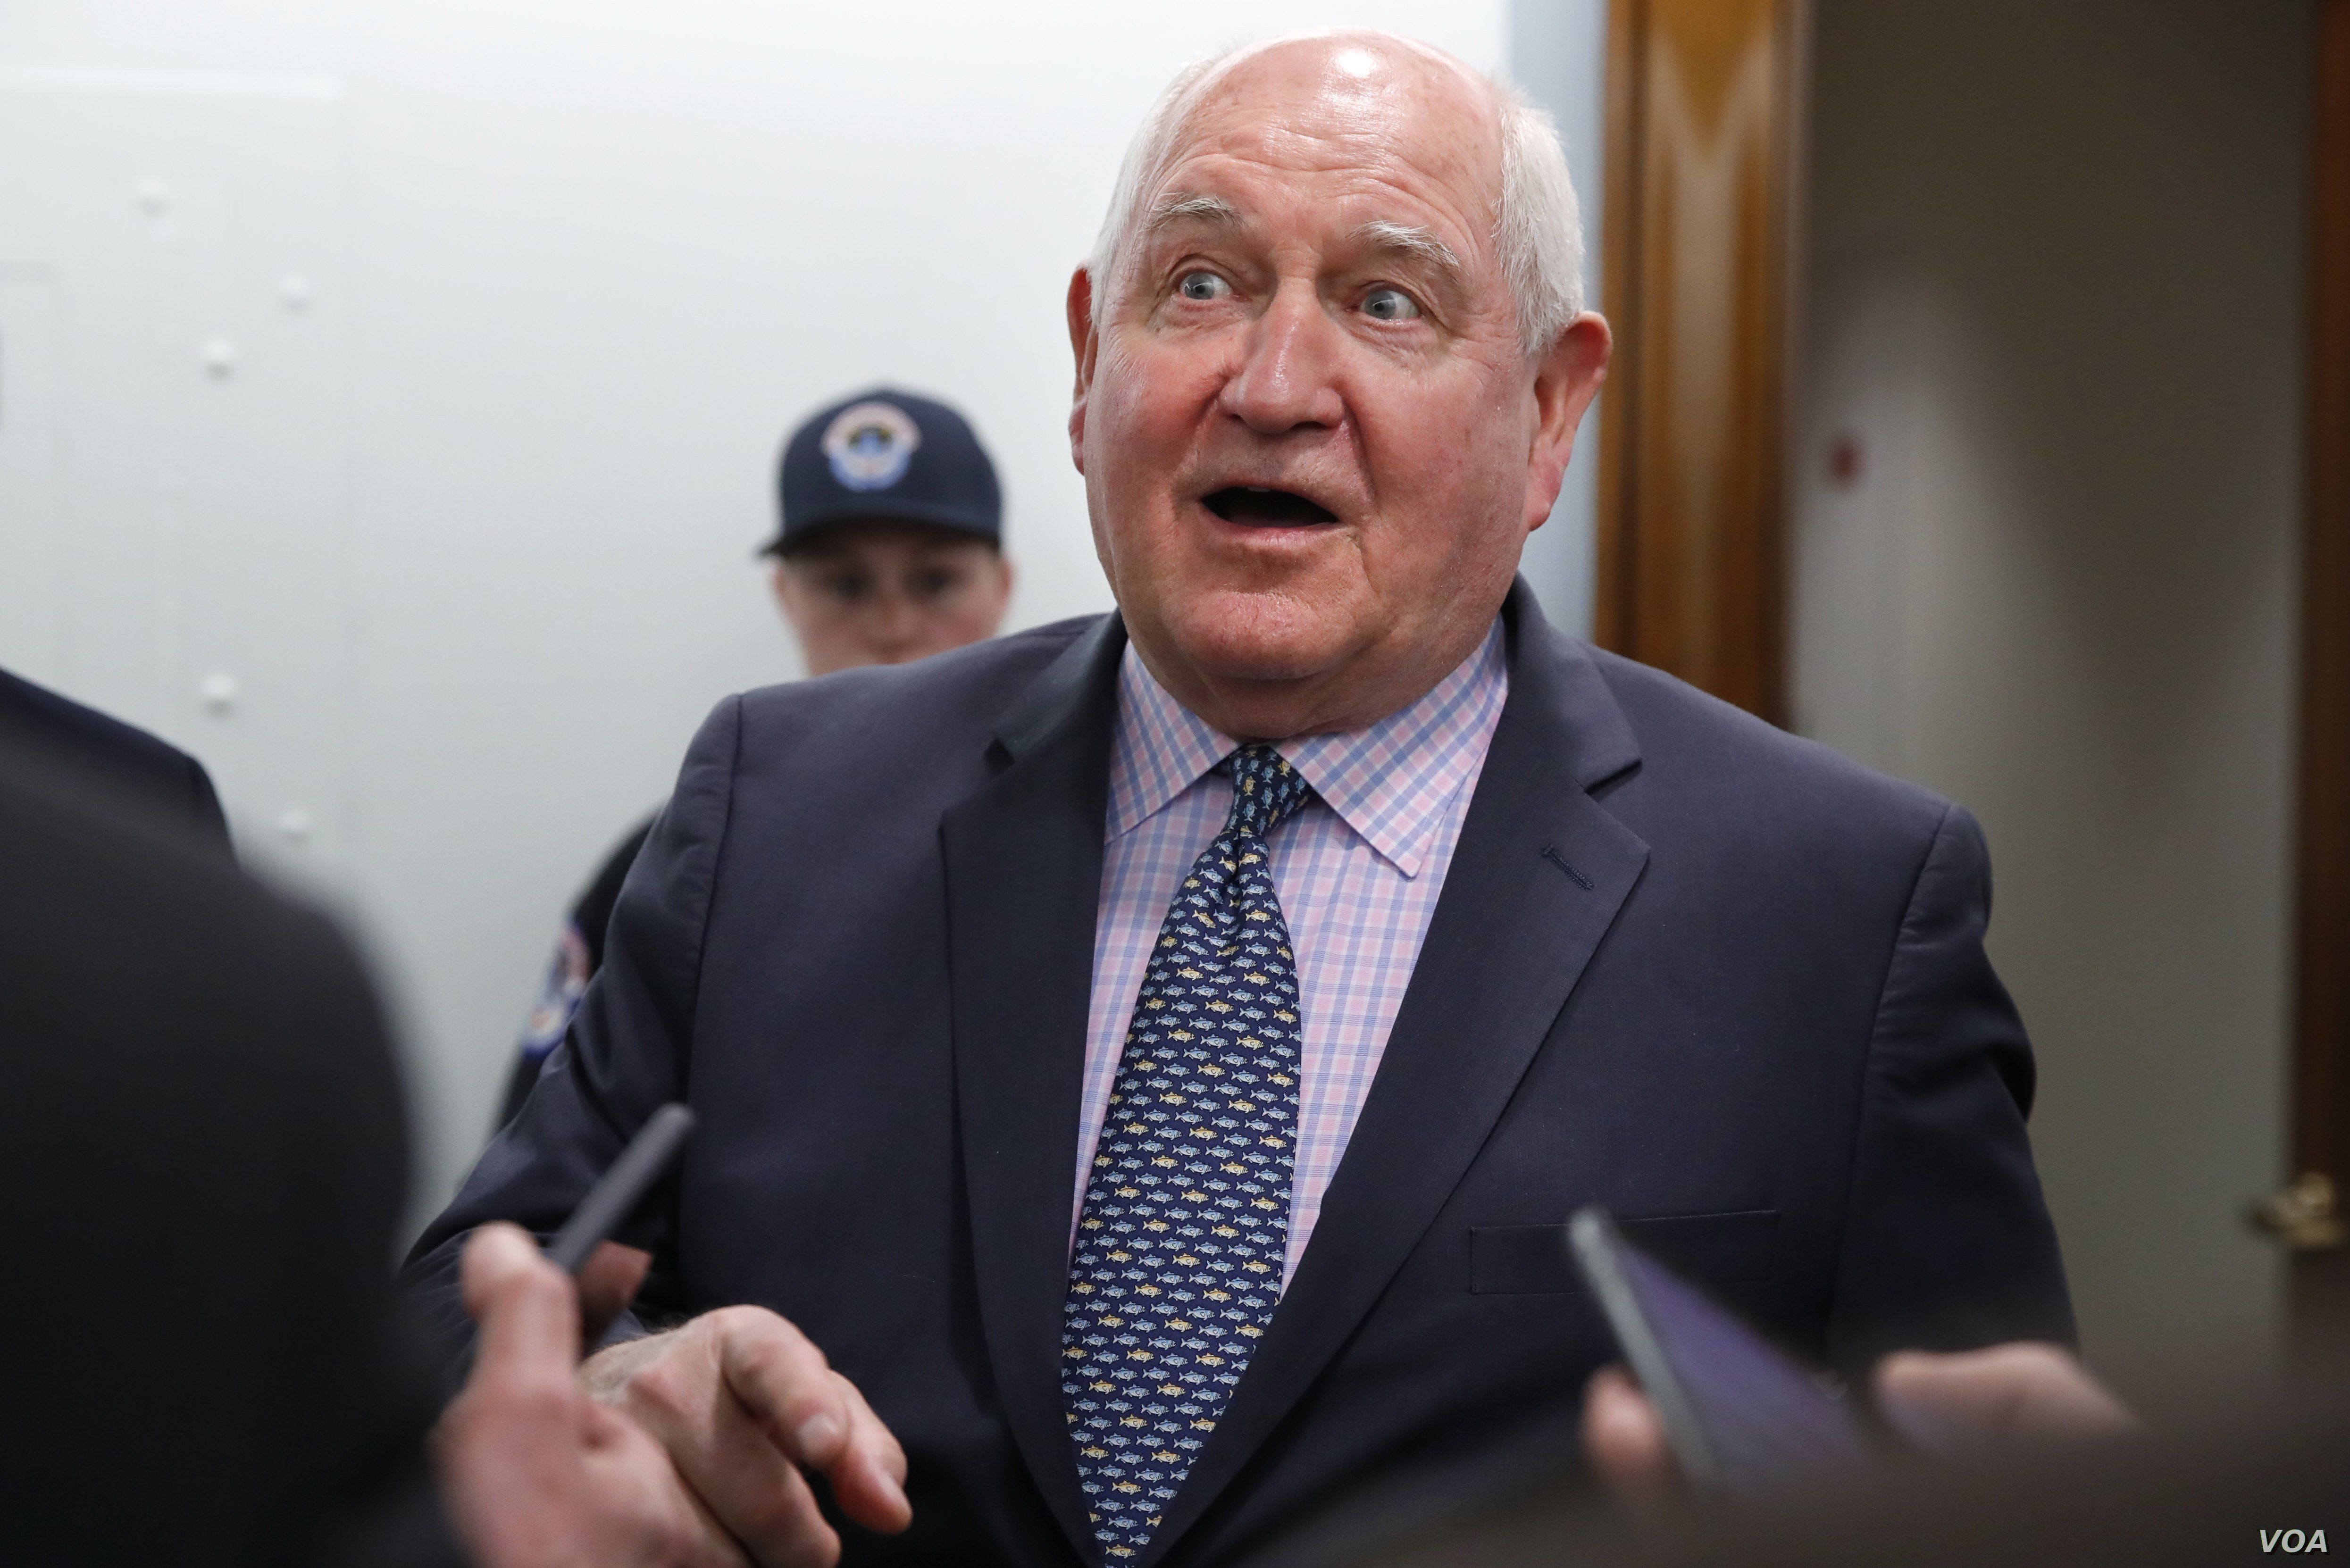 FILE - U.S. Agriculture Secretary Sonny Perdue speaks with reporters on Capitol Hill in Washington, April 11, 2018.